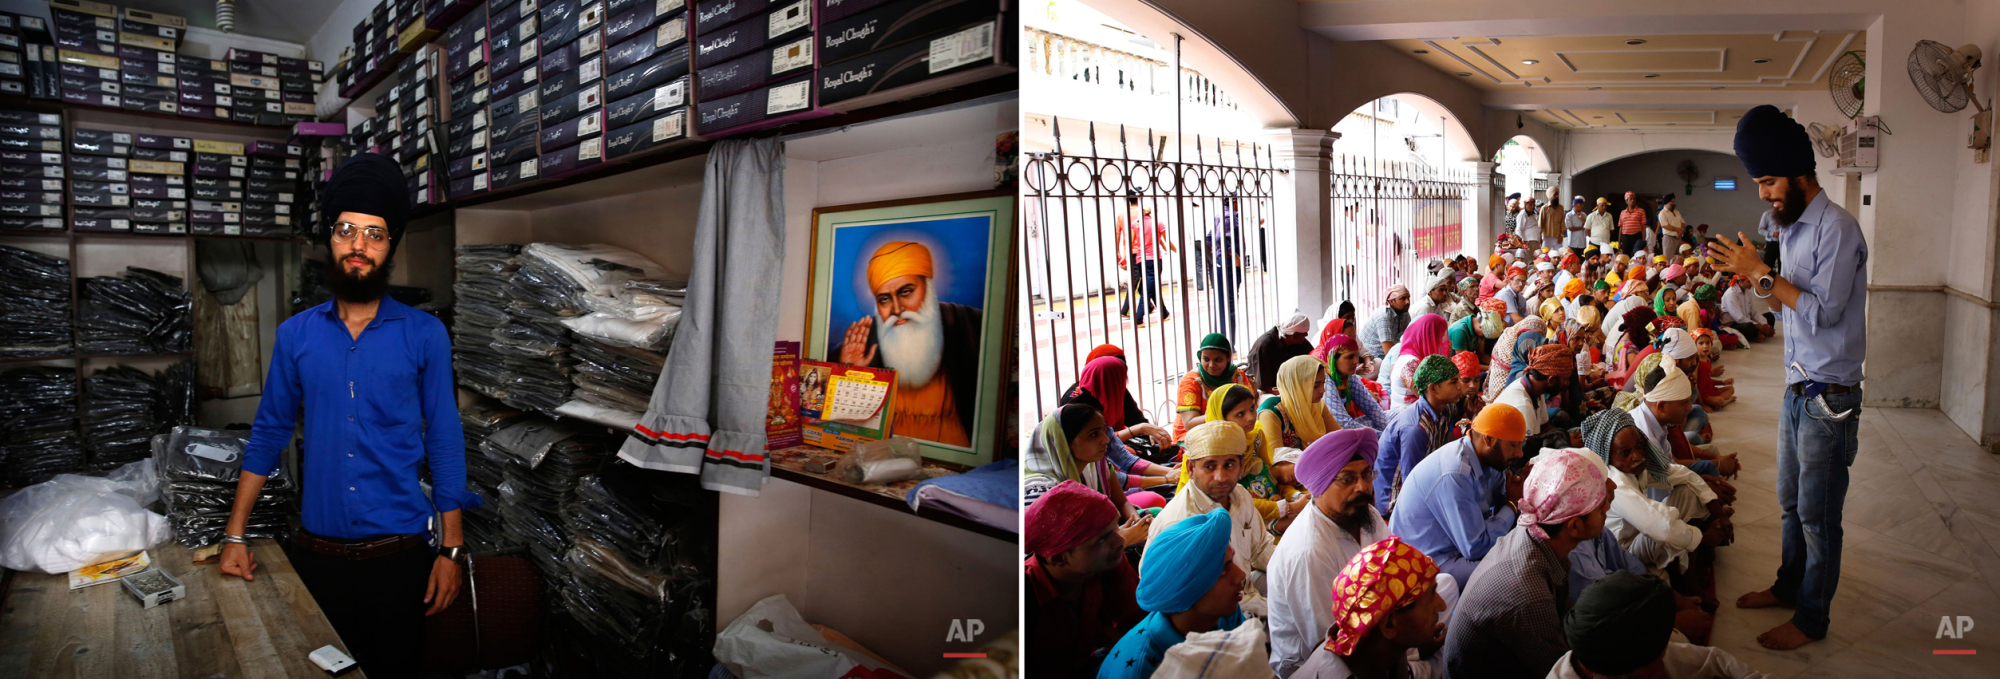  This two picture combo shows on left, Darshan Singh, 24, a garments store owner, poses for photos inside his store in New Delhi, India, on June 1, 2015, as on right, he sings religious prayers for devotees before the start of langar, or free communi